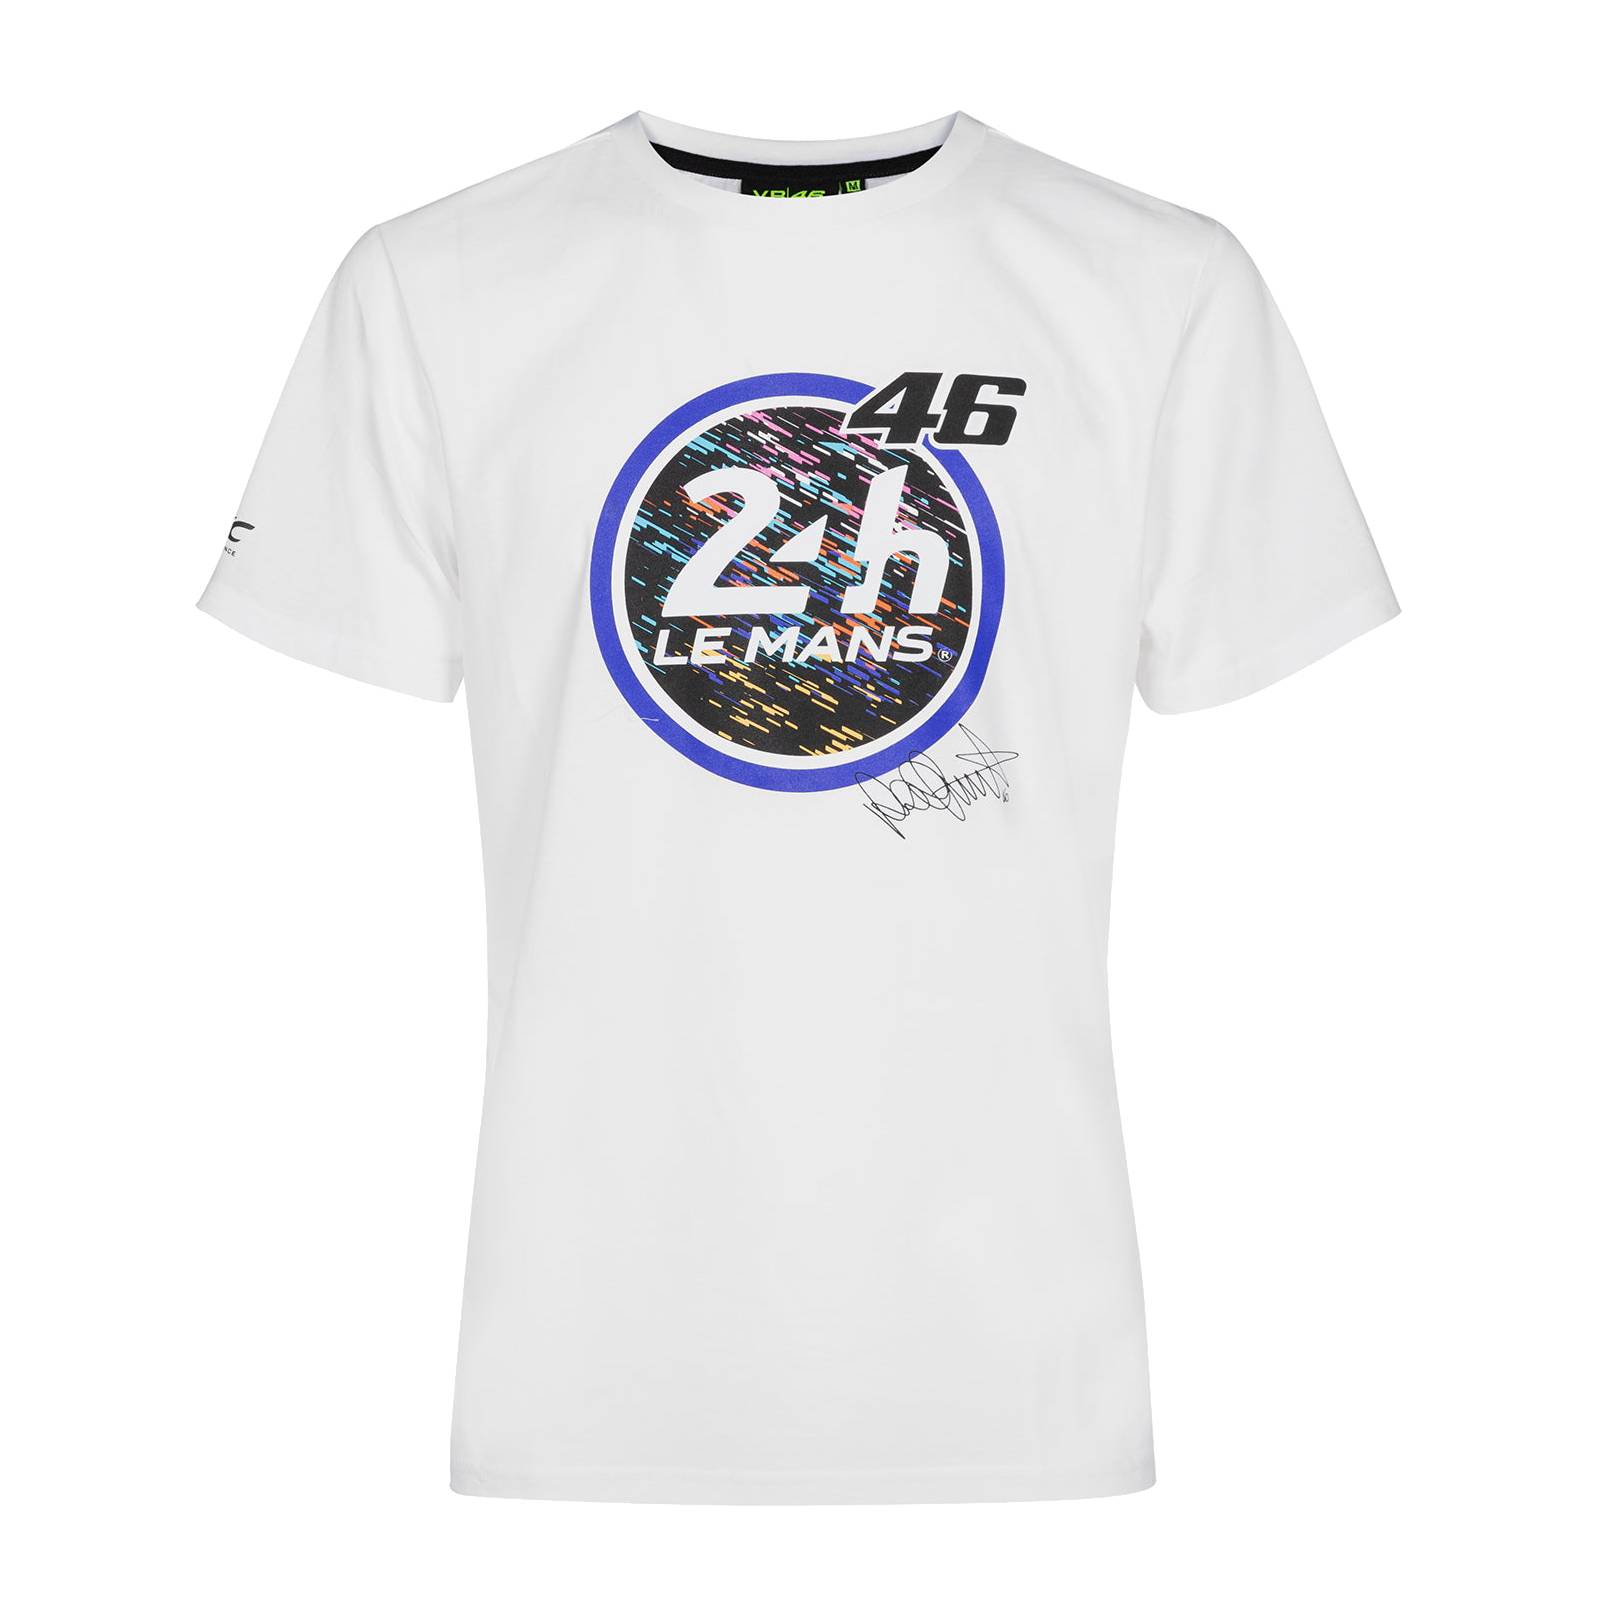 Valentino Rossi T-Shirt "24h Le Mans" - weiß